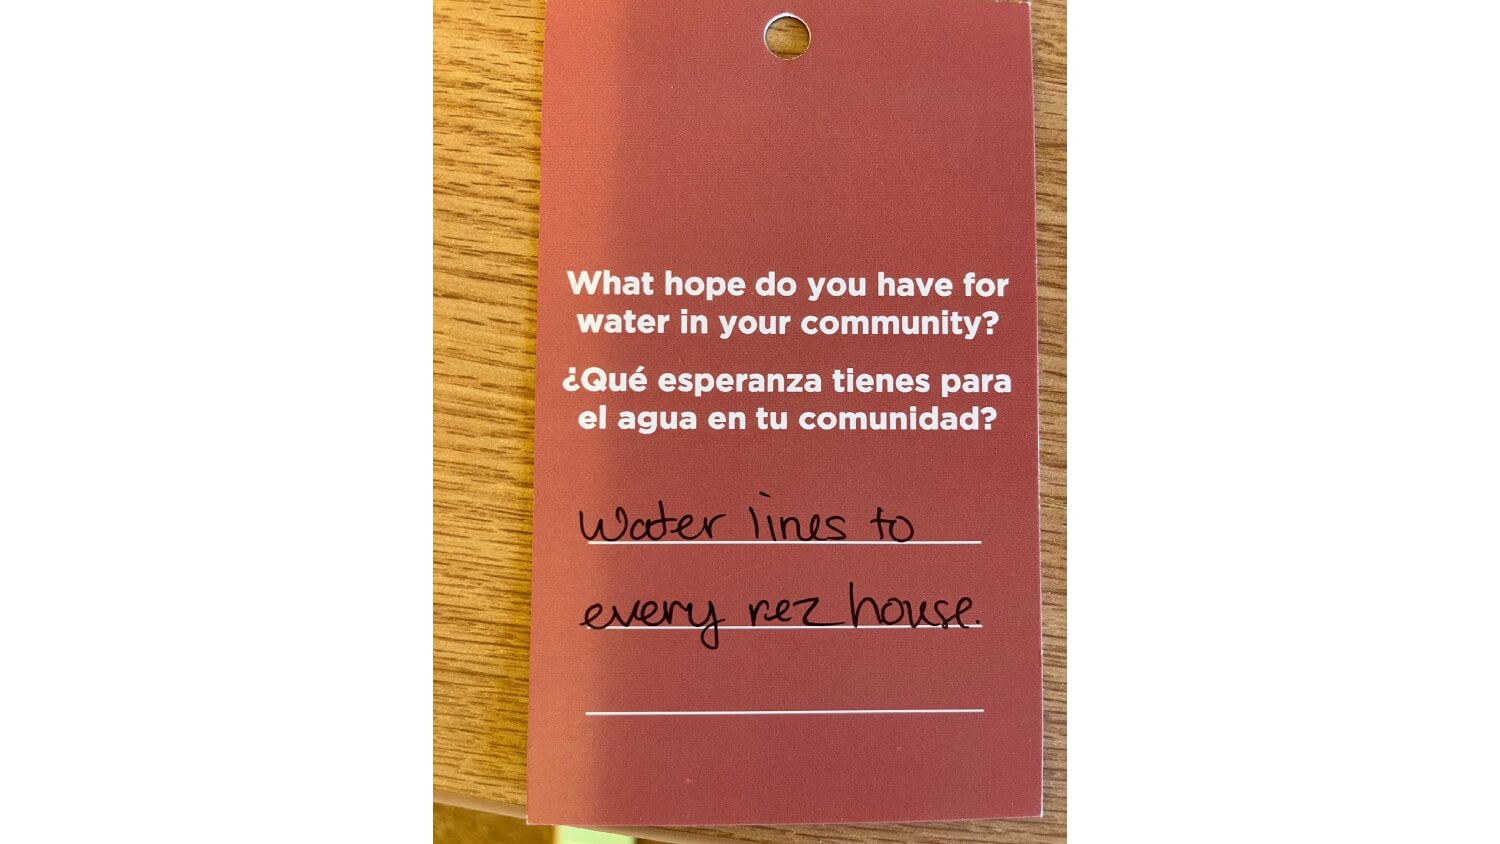 What hope do you have for water in your community? Water lines to every rez house.